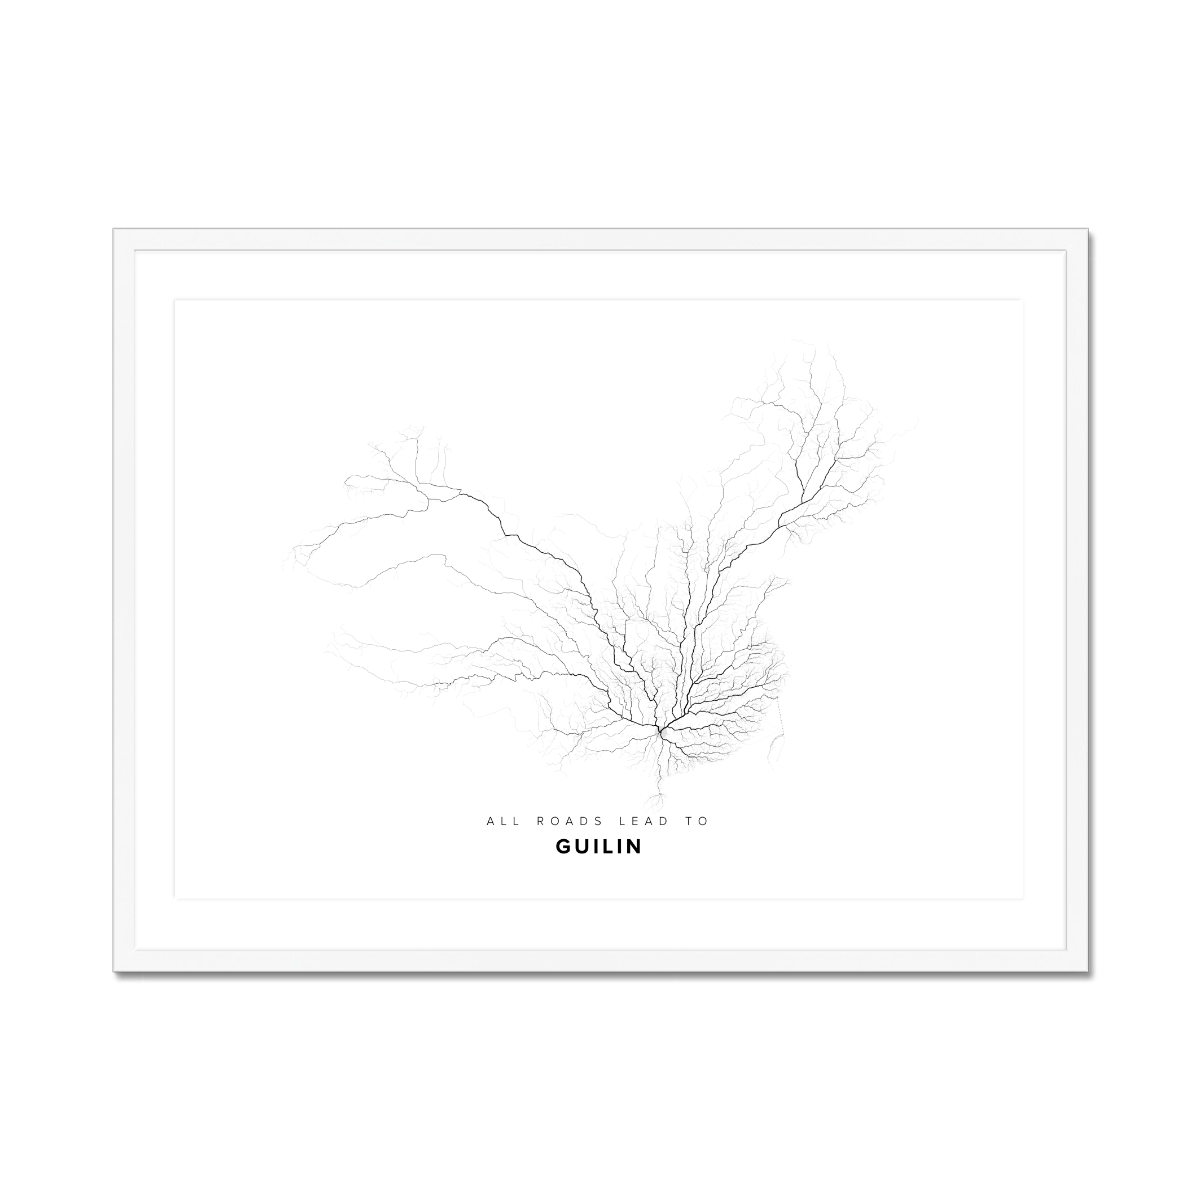 All roads lead to Guilin (China) Fine Art Map Print